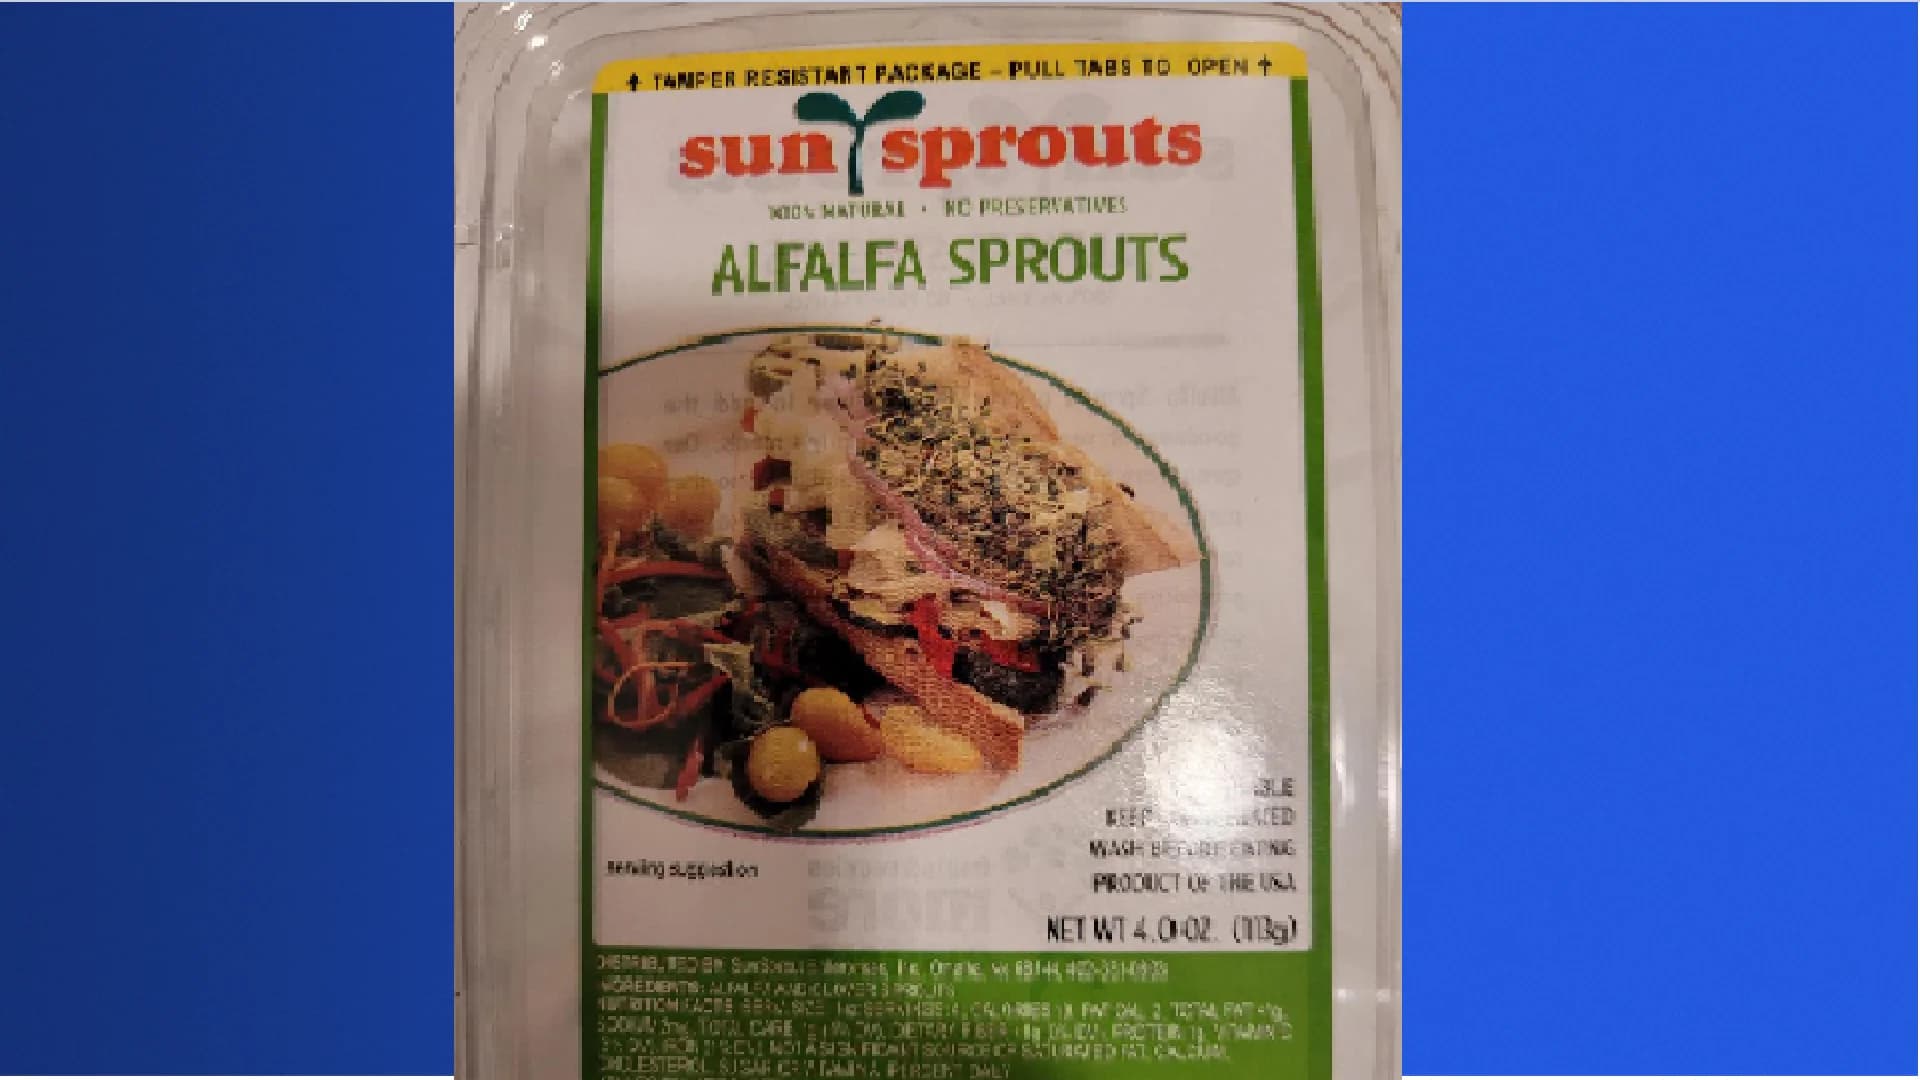 Alfalfa sprouts being recalled after salmonella outbreak